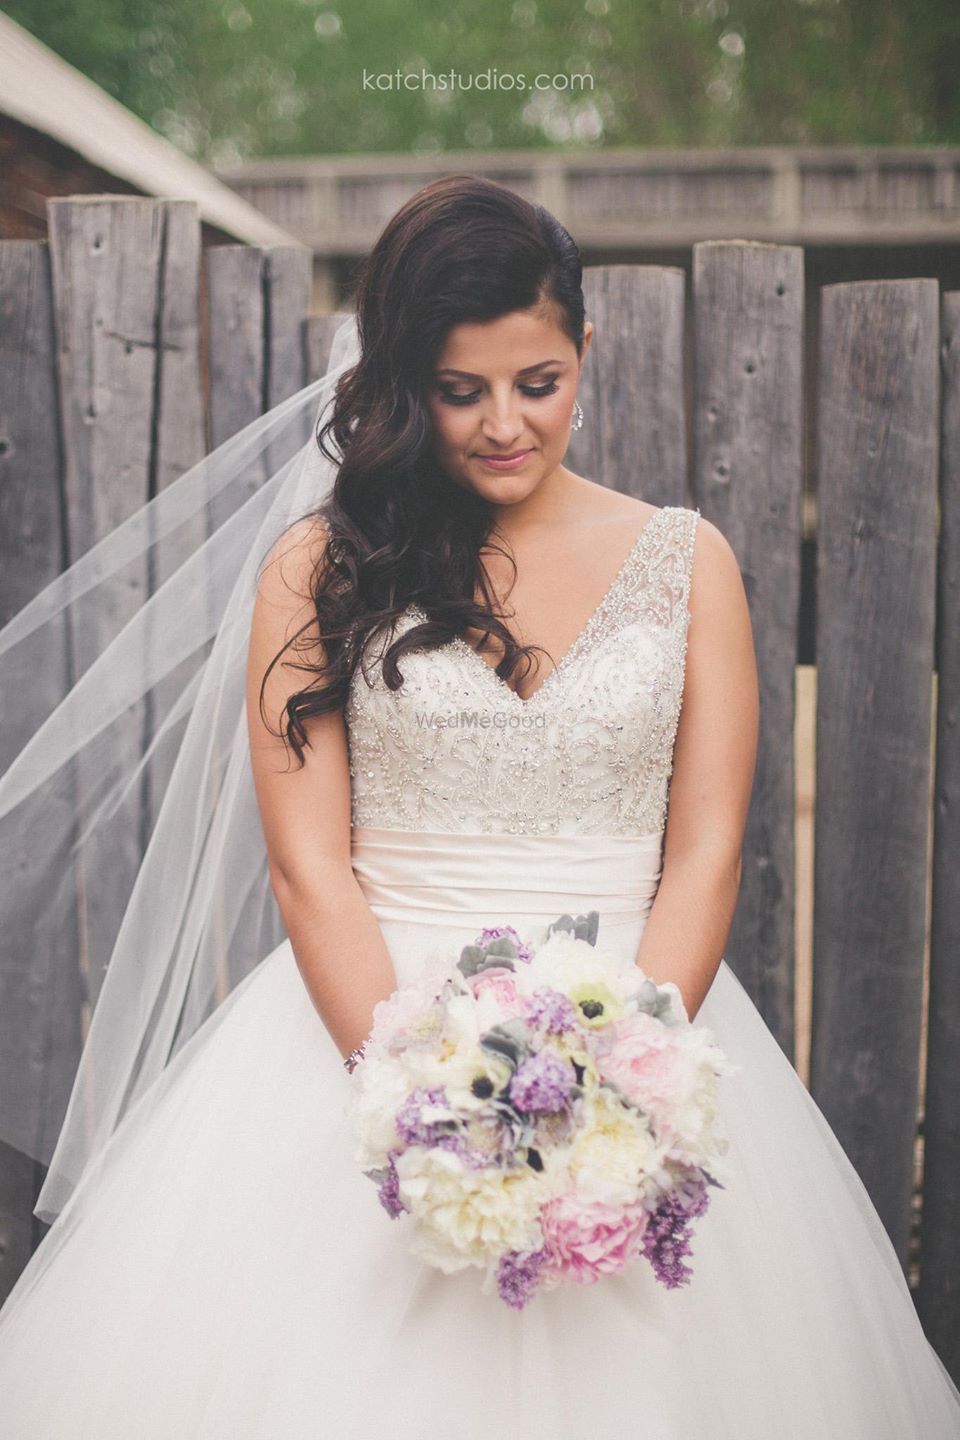 Photo of Grey and white wedding gown with lavender bouquet